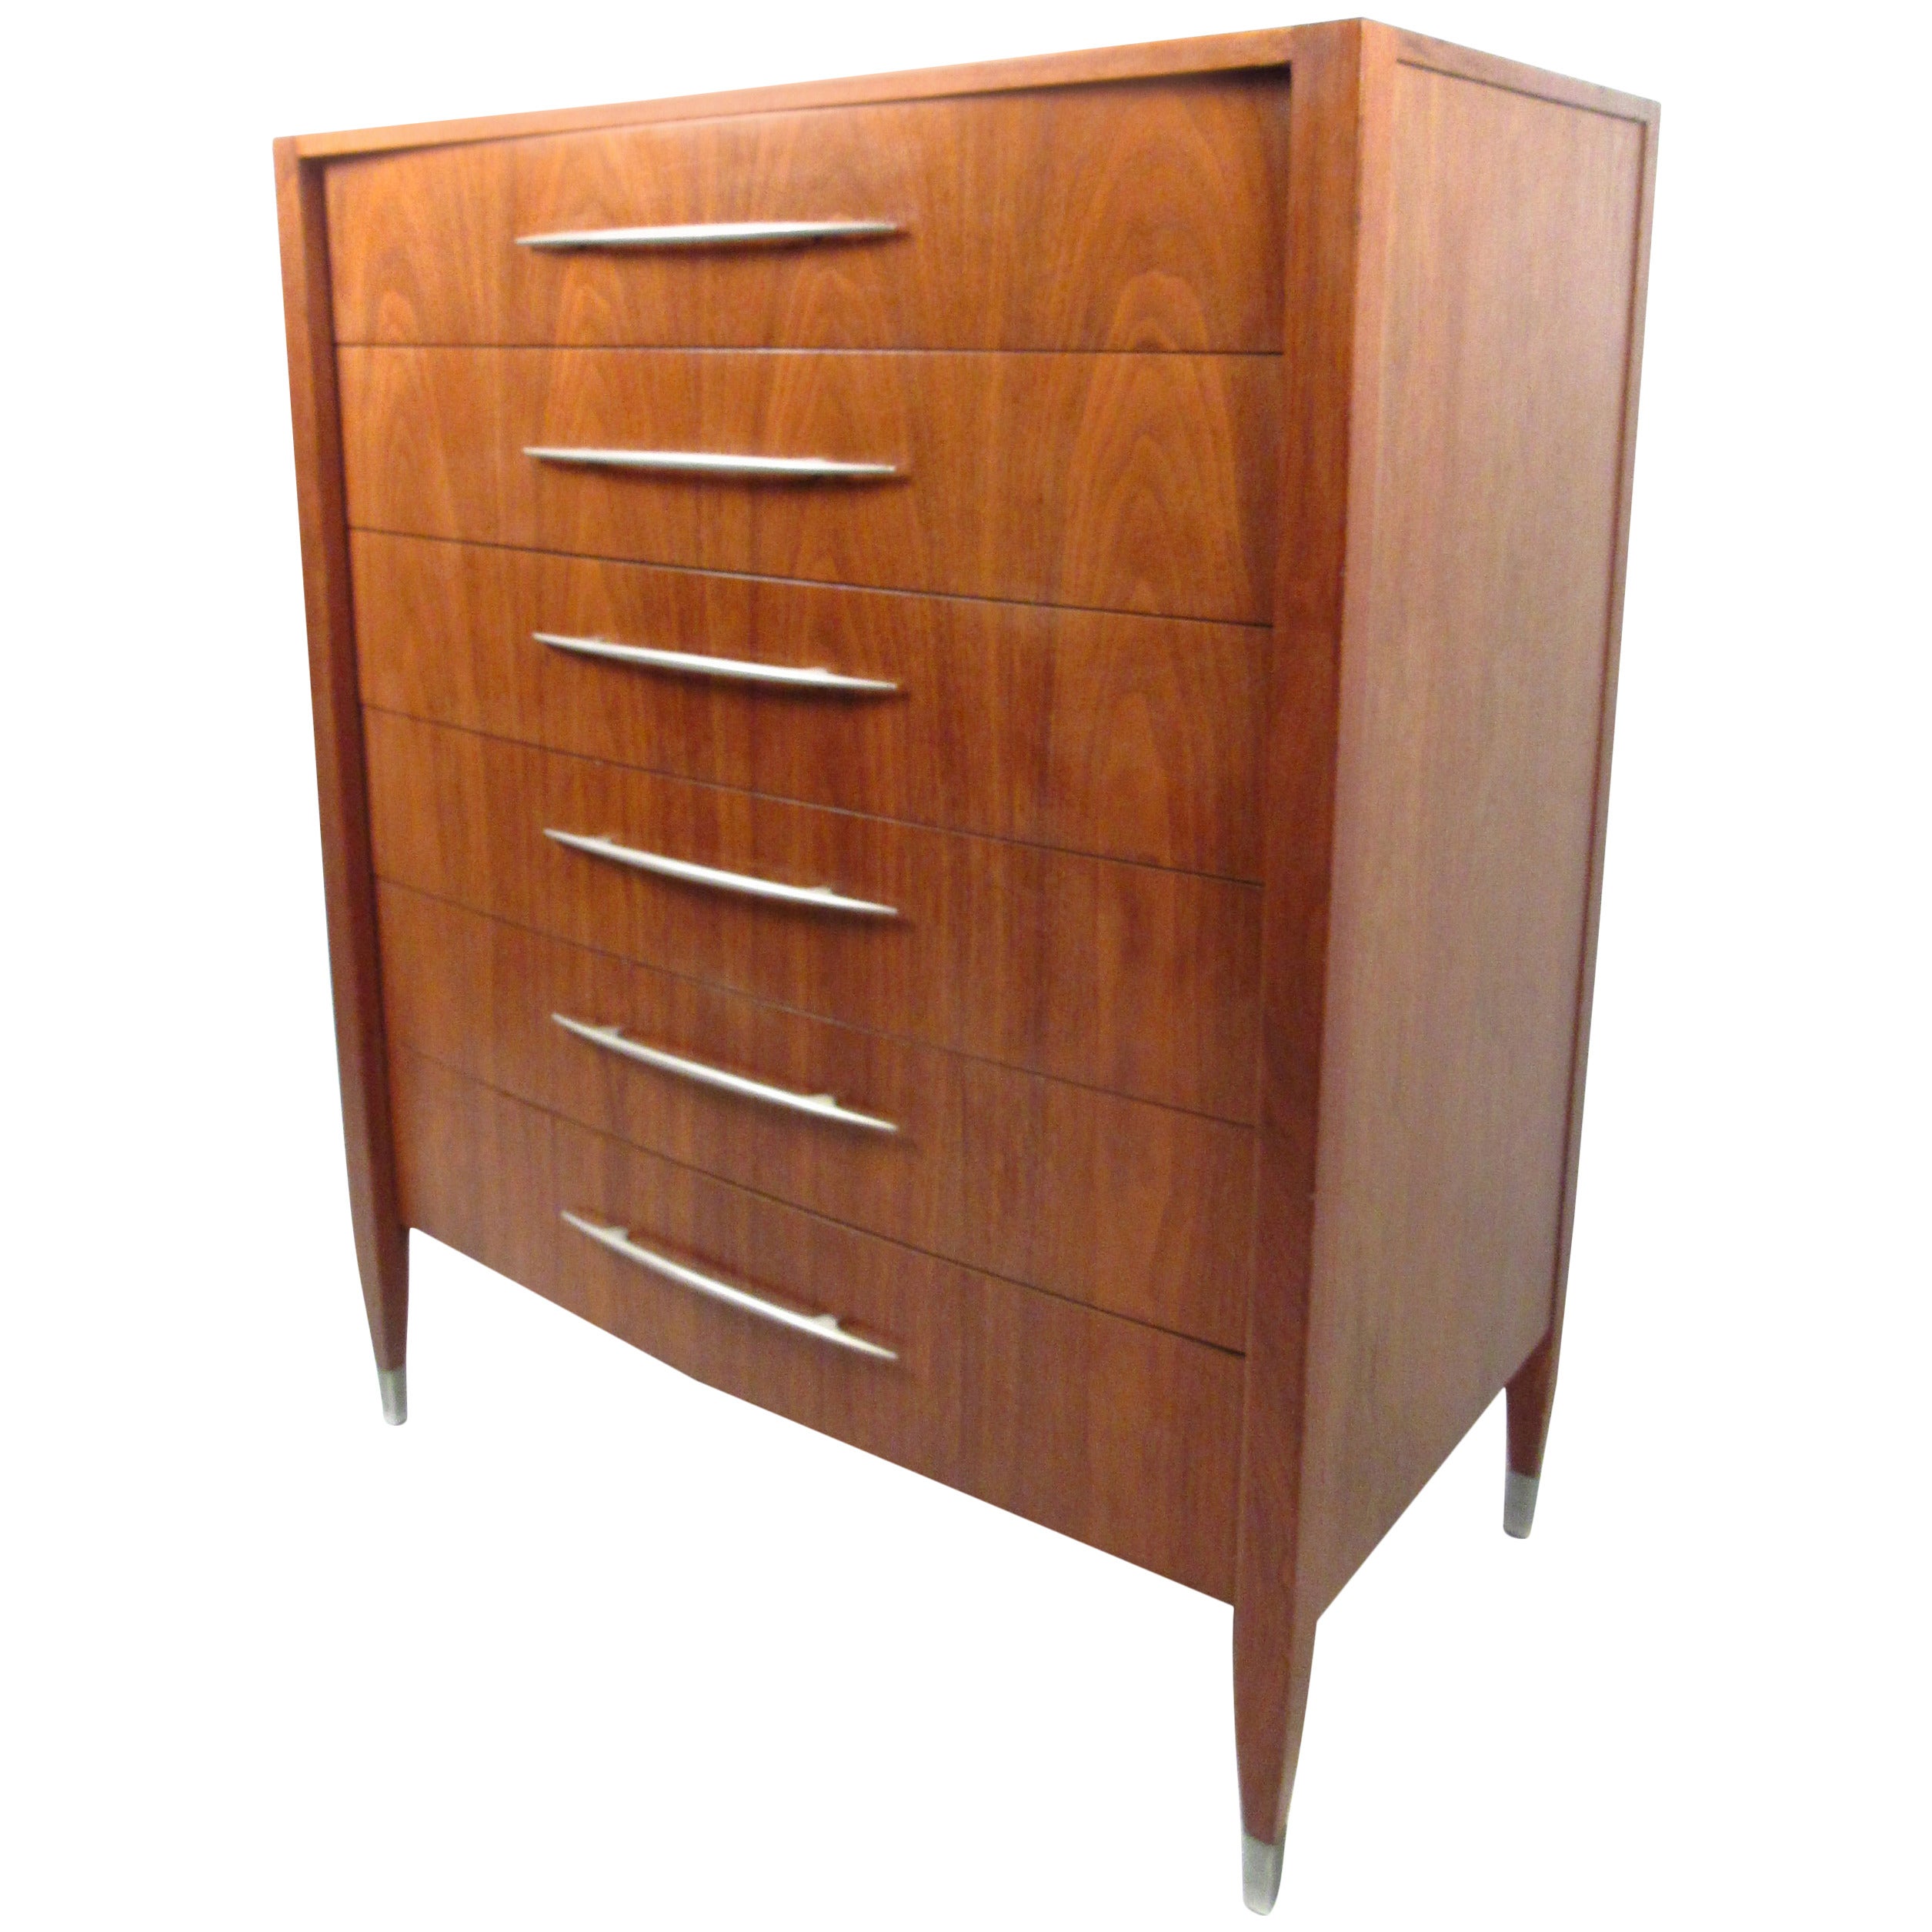 Vintage American Walnut Dresser with Chrome Accenting by Sligh Furniture